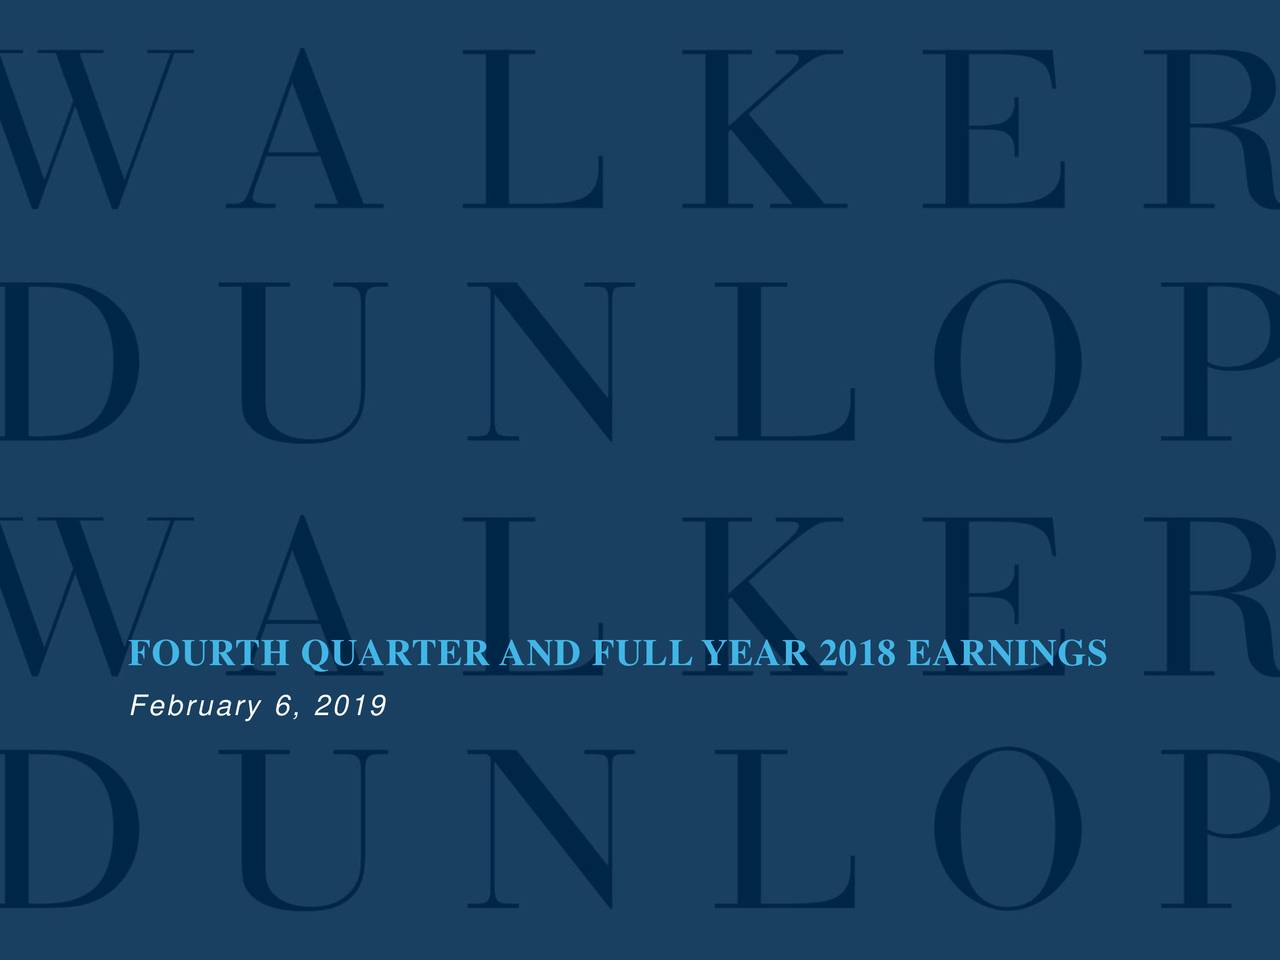 FOURTH QUARTER AND FULL YEAR 2018 EARNINGS